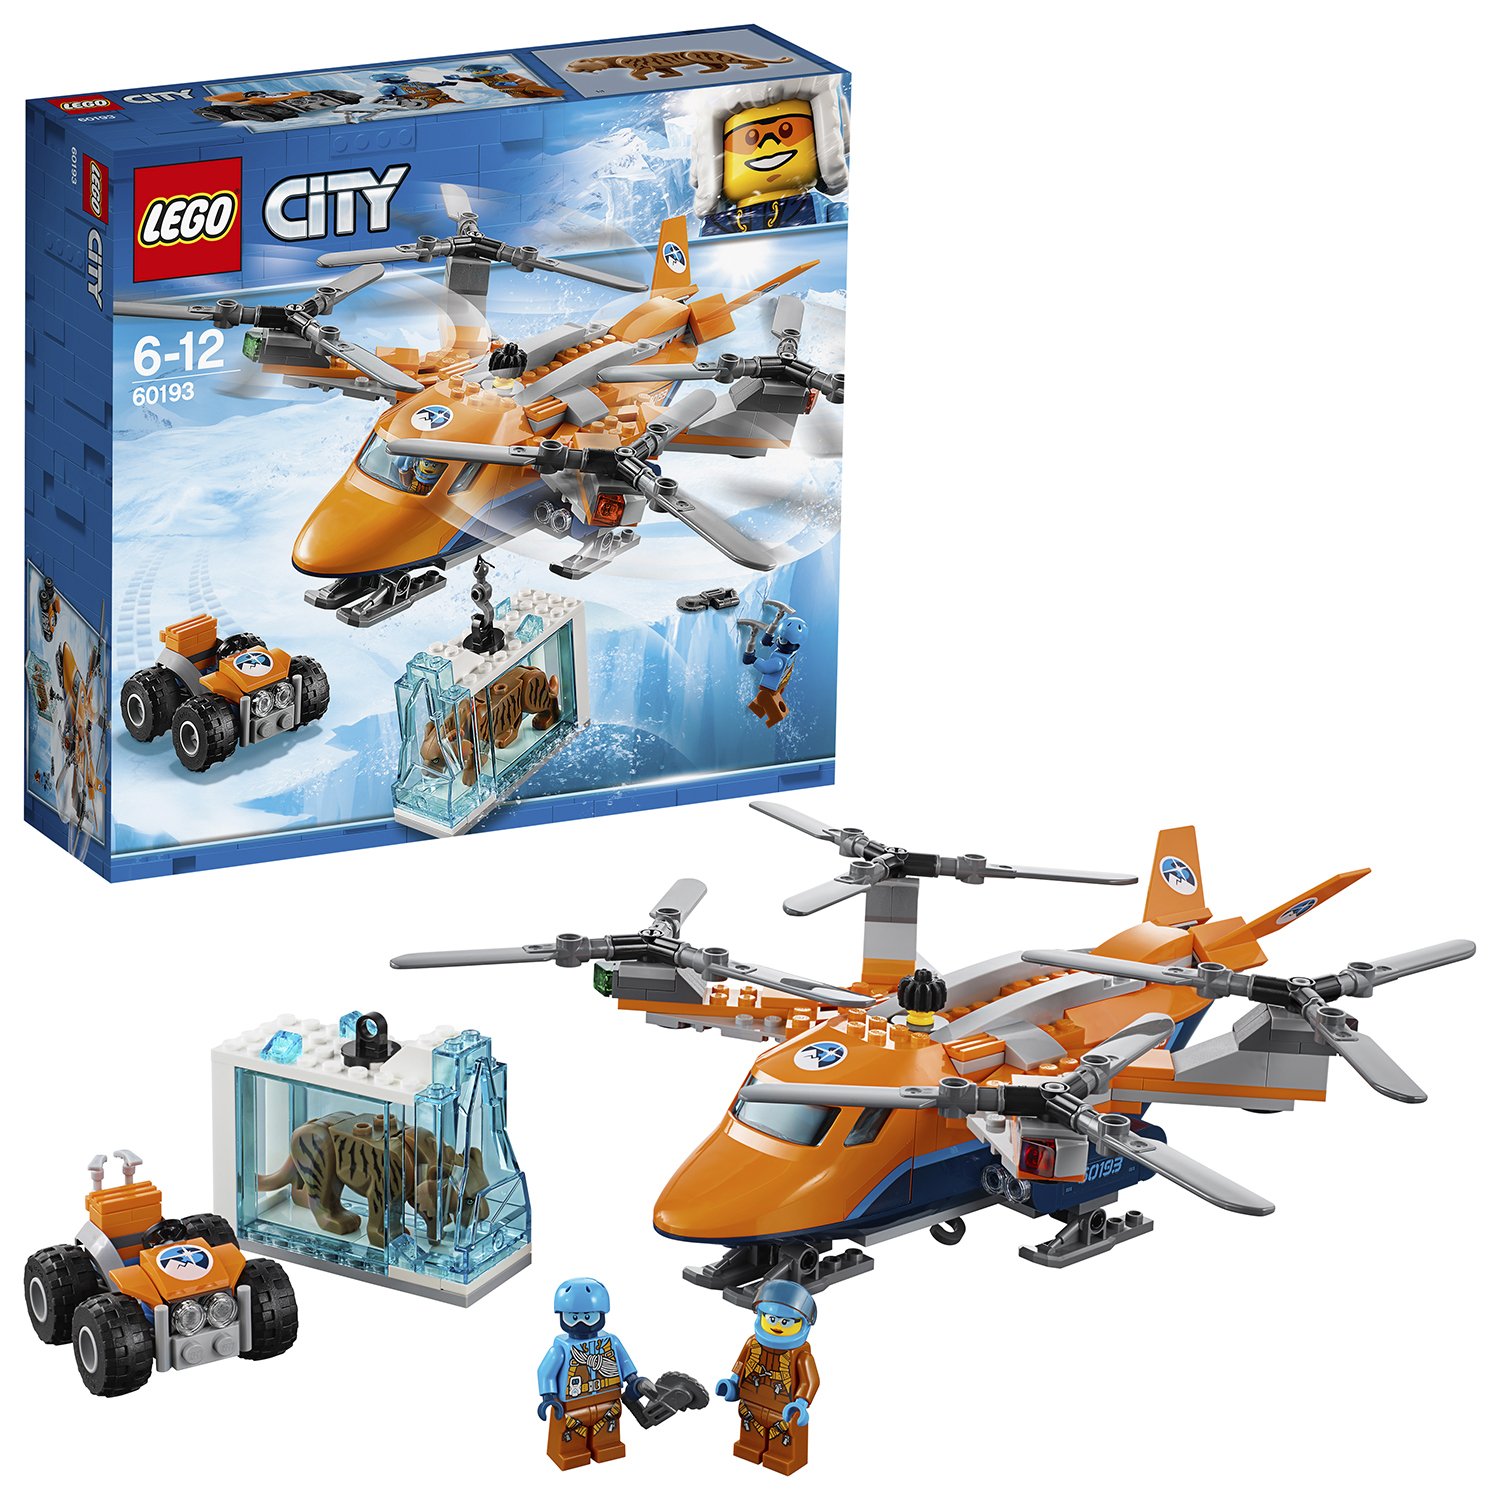 LEGO City Arctic Air Transport Helicopter Toy - 60193